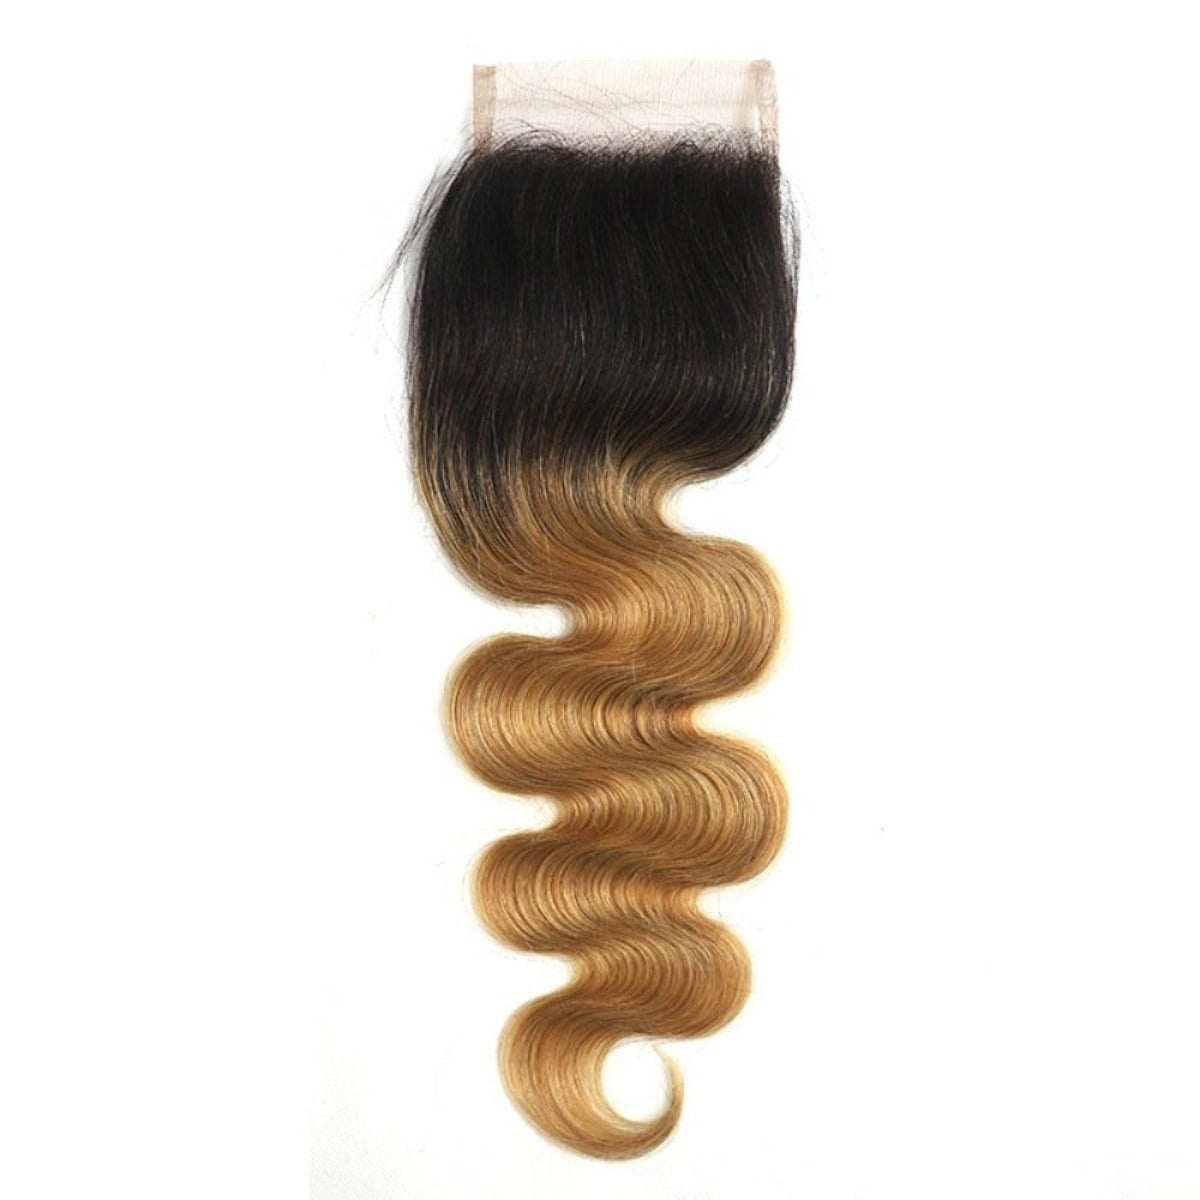 Body Wave Virgin Human Hair Bundles with Closure Ombre